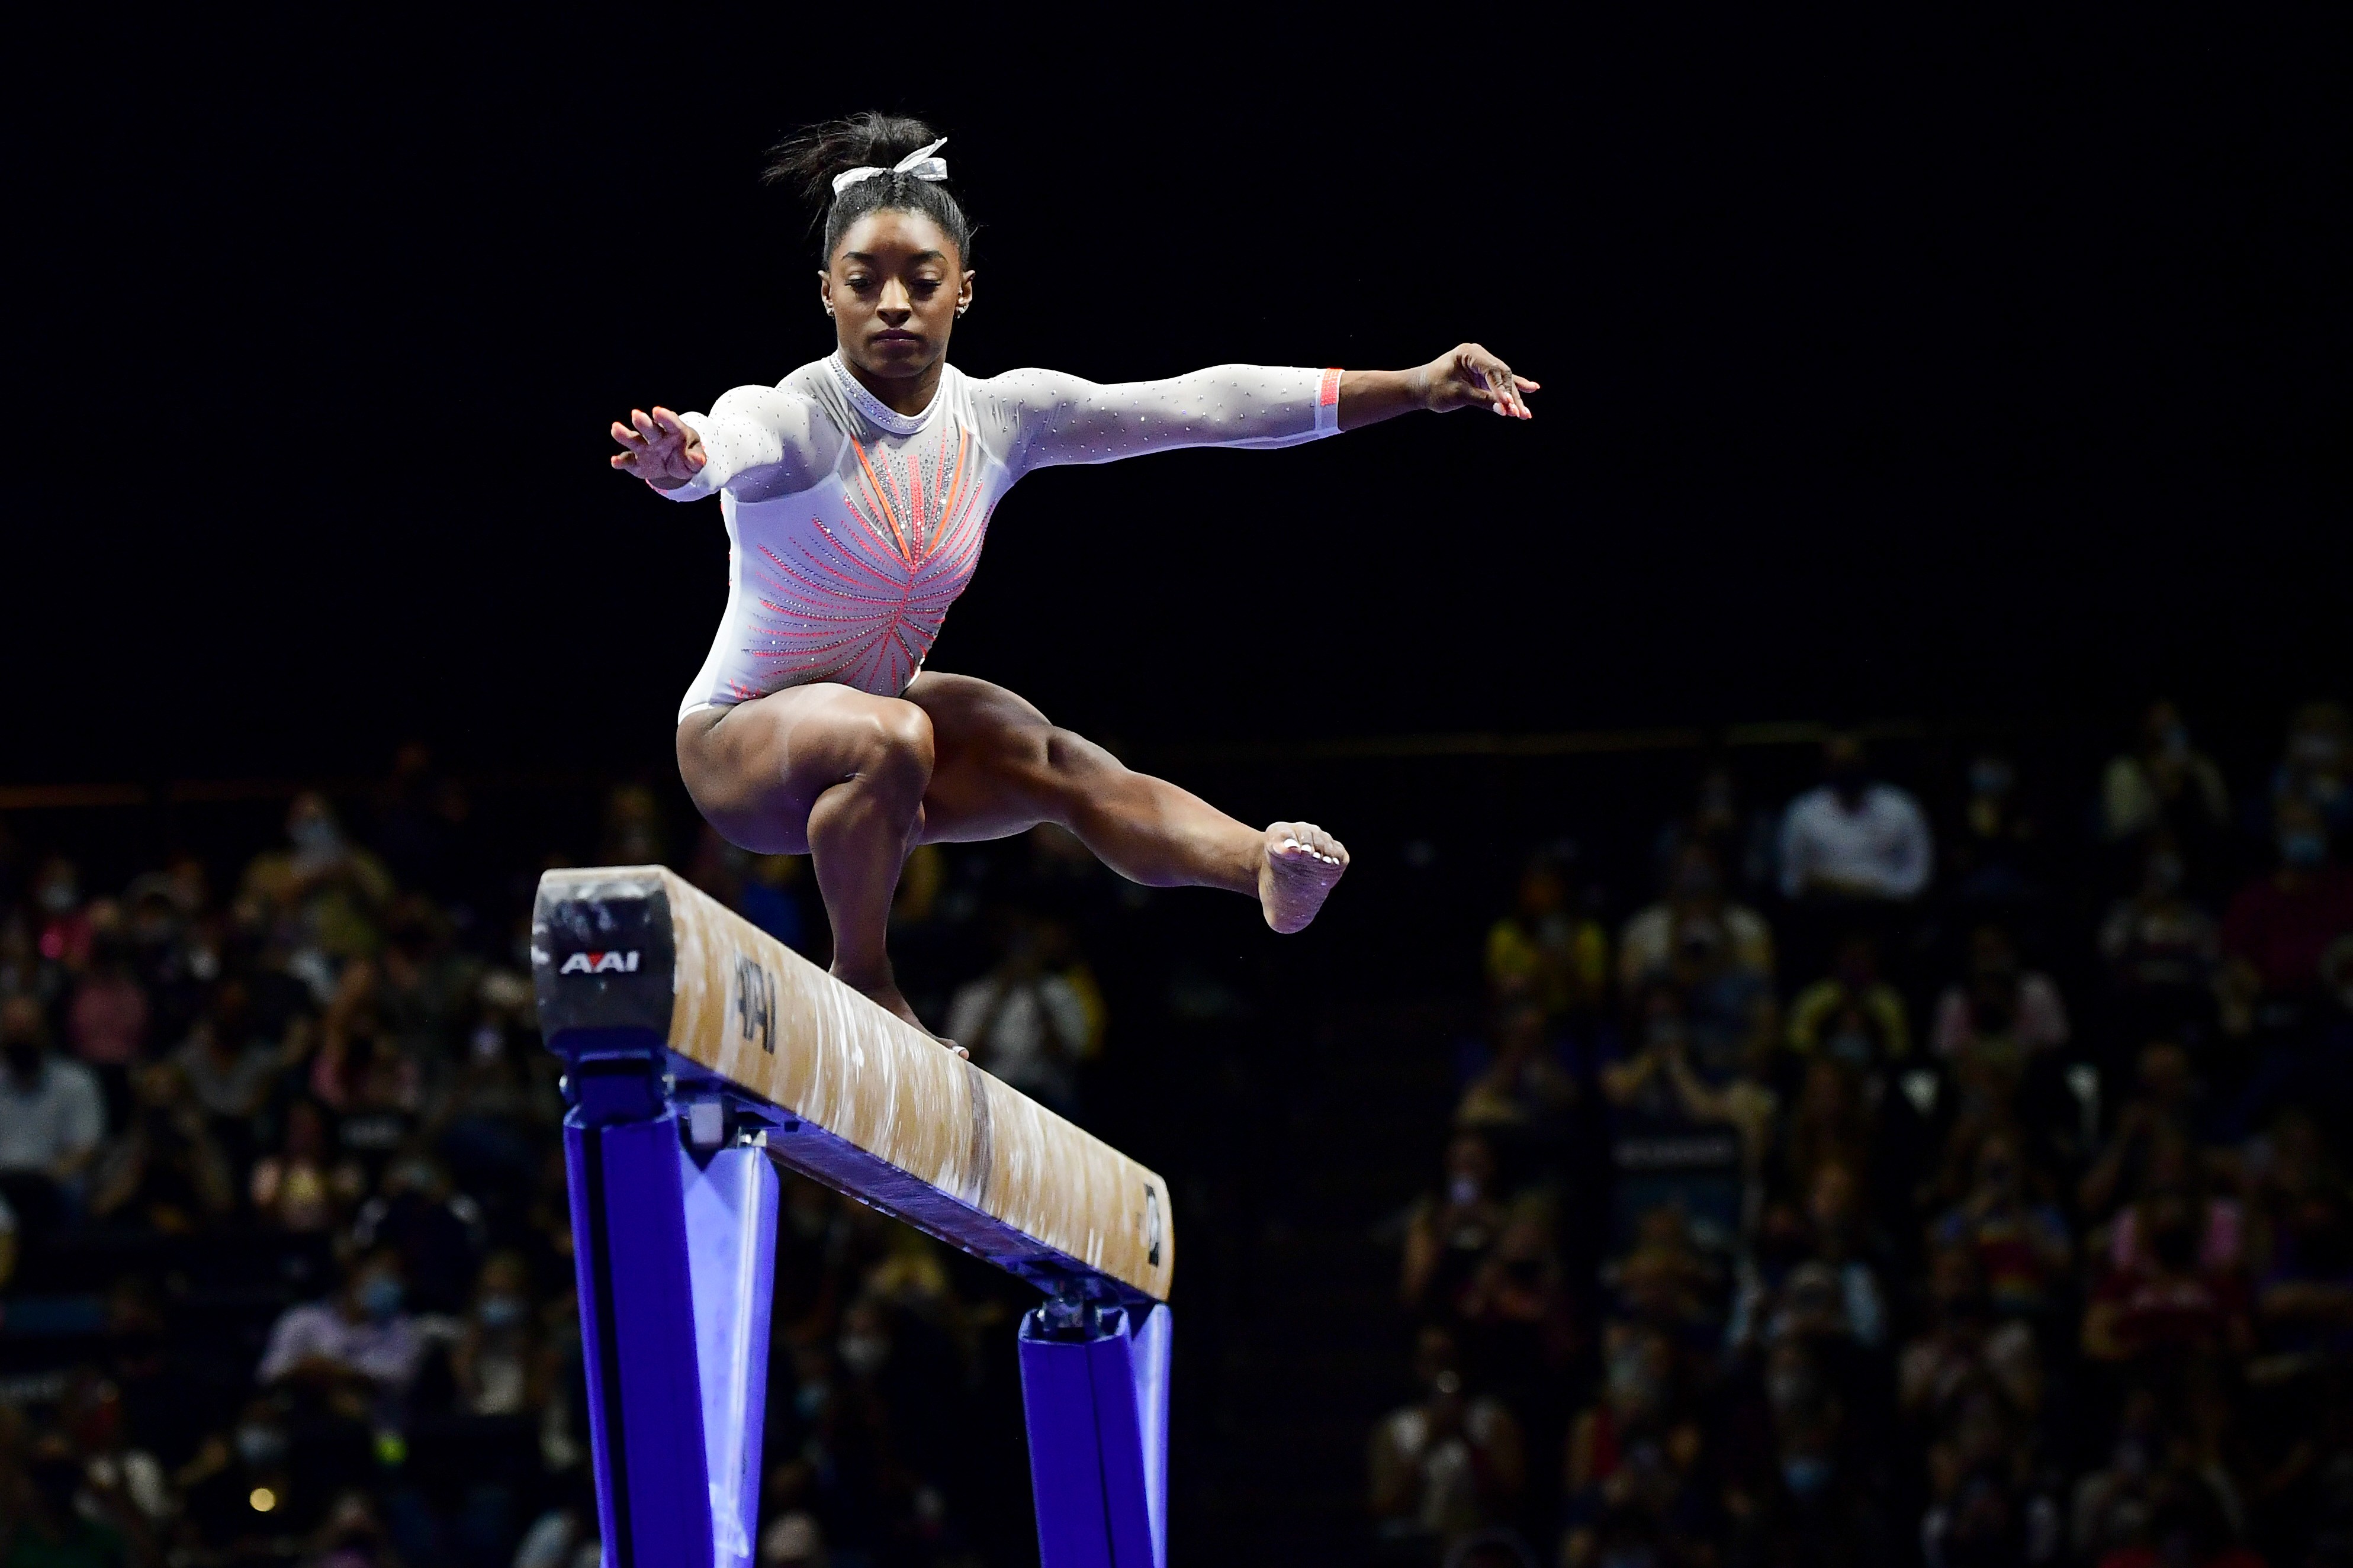 INDIANAPOLIS, INDIANA - MAY 22: Simone Biles competes on the beam during the 2021 GK U.S. Classic gymnastics competition at the Indiana Convention Center on May 22, 2021 in Indianapolis, Indiana. (Photo by Emilee Chinn/Getty Images) (Foto: Getty Images)